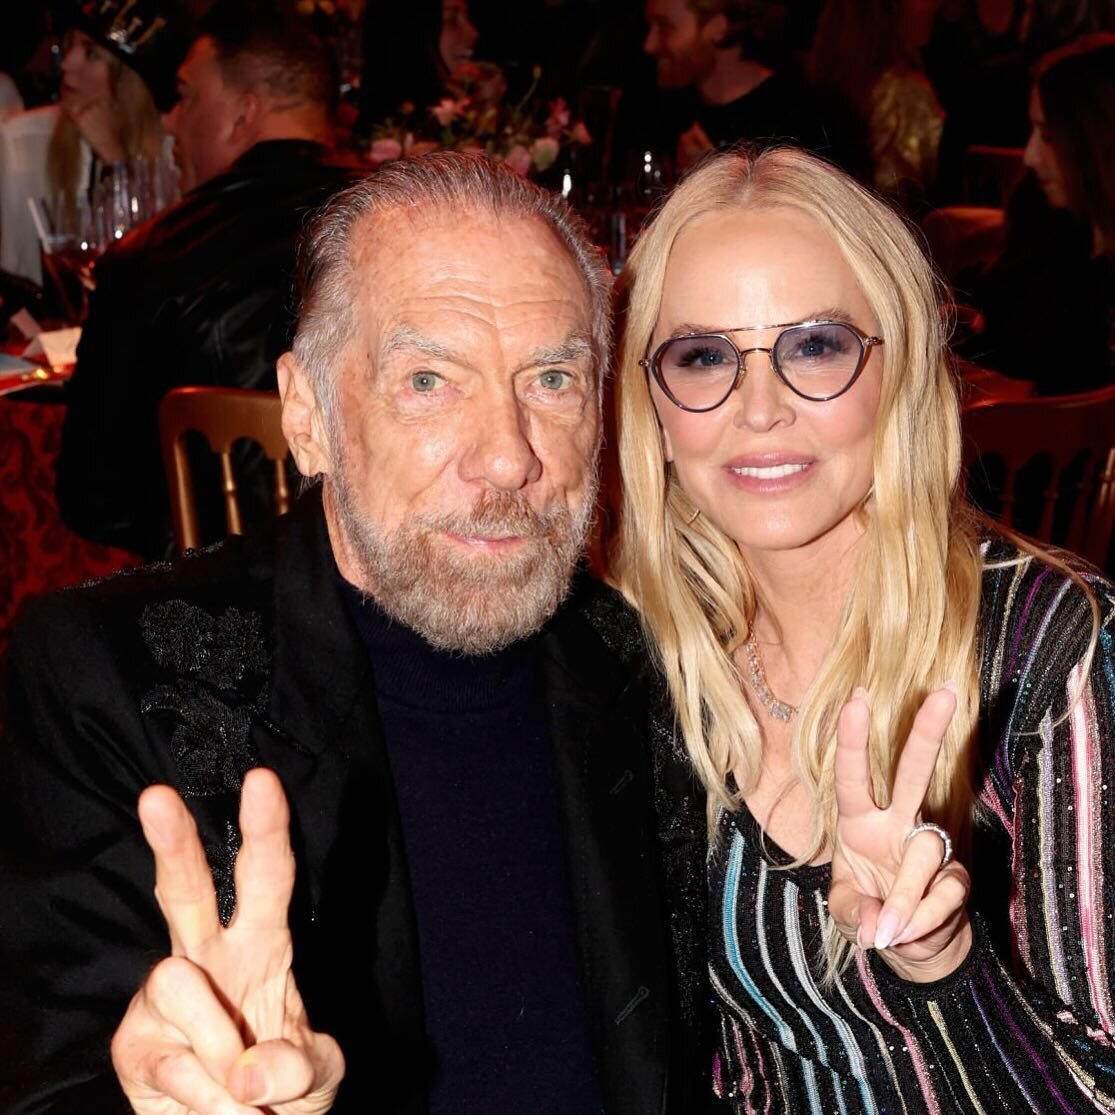 John Paul and Eloise at Steven Tyler&rsquo;s Grammy watching party benefiting @janiesfund 🎶🎵